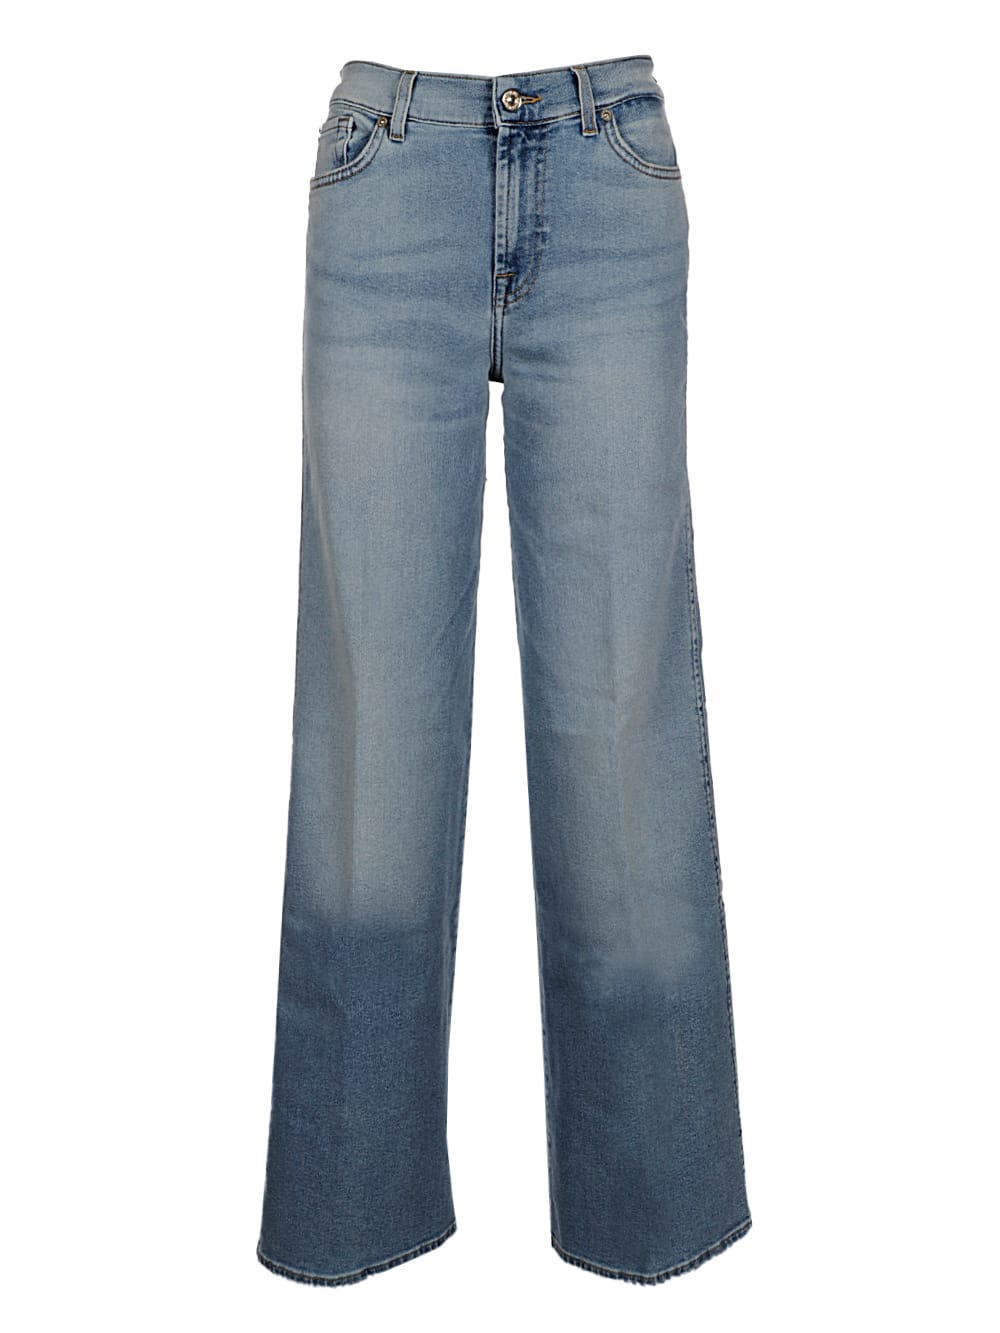 7 For All Mankind Lotta Luxe Vintage Dream